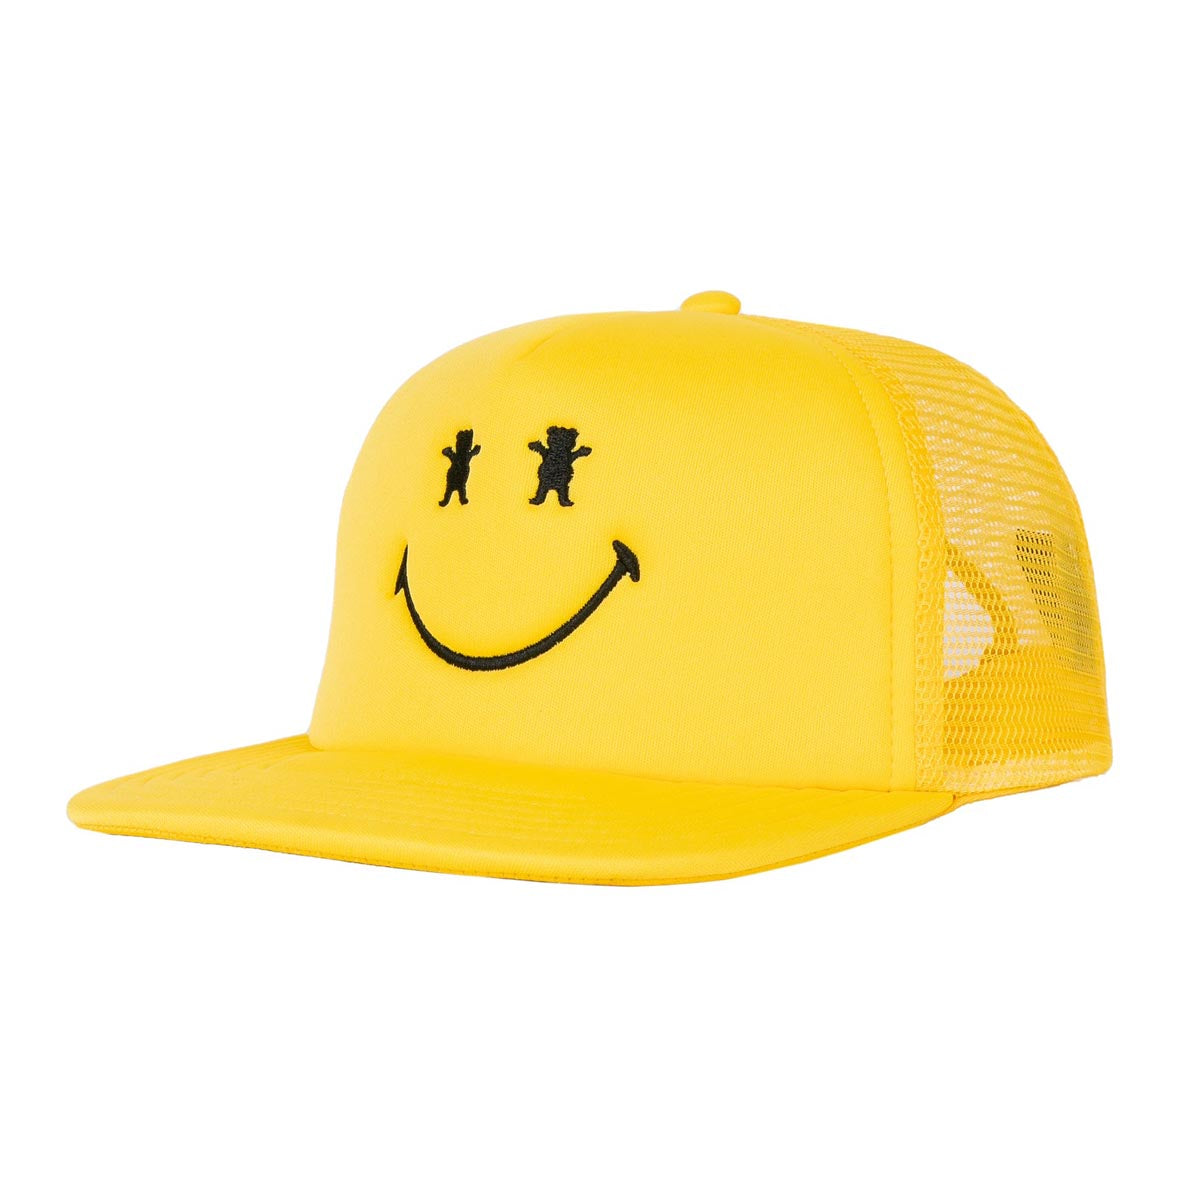 Grizzly x Smiley World Big Smile Trucker Snapback Hat - Yellow image 1